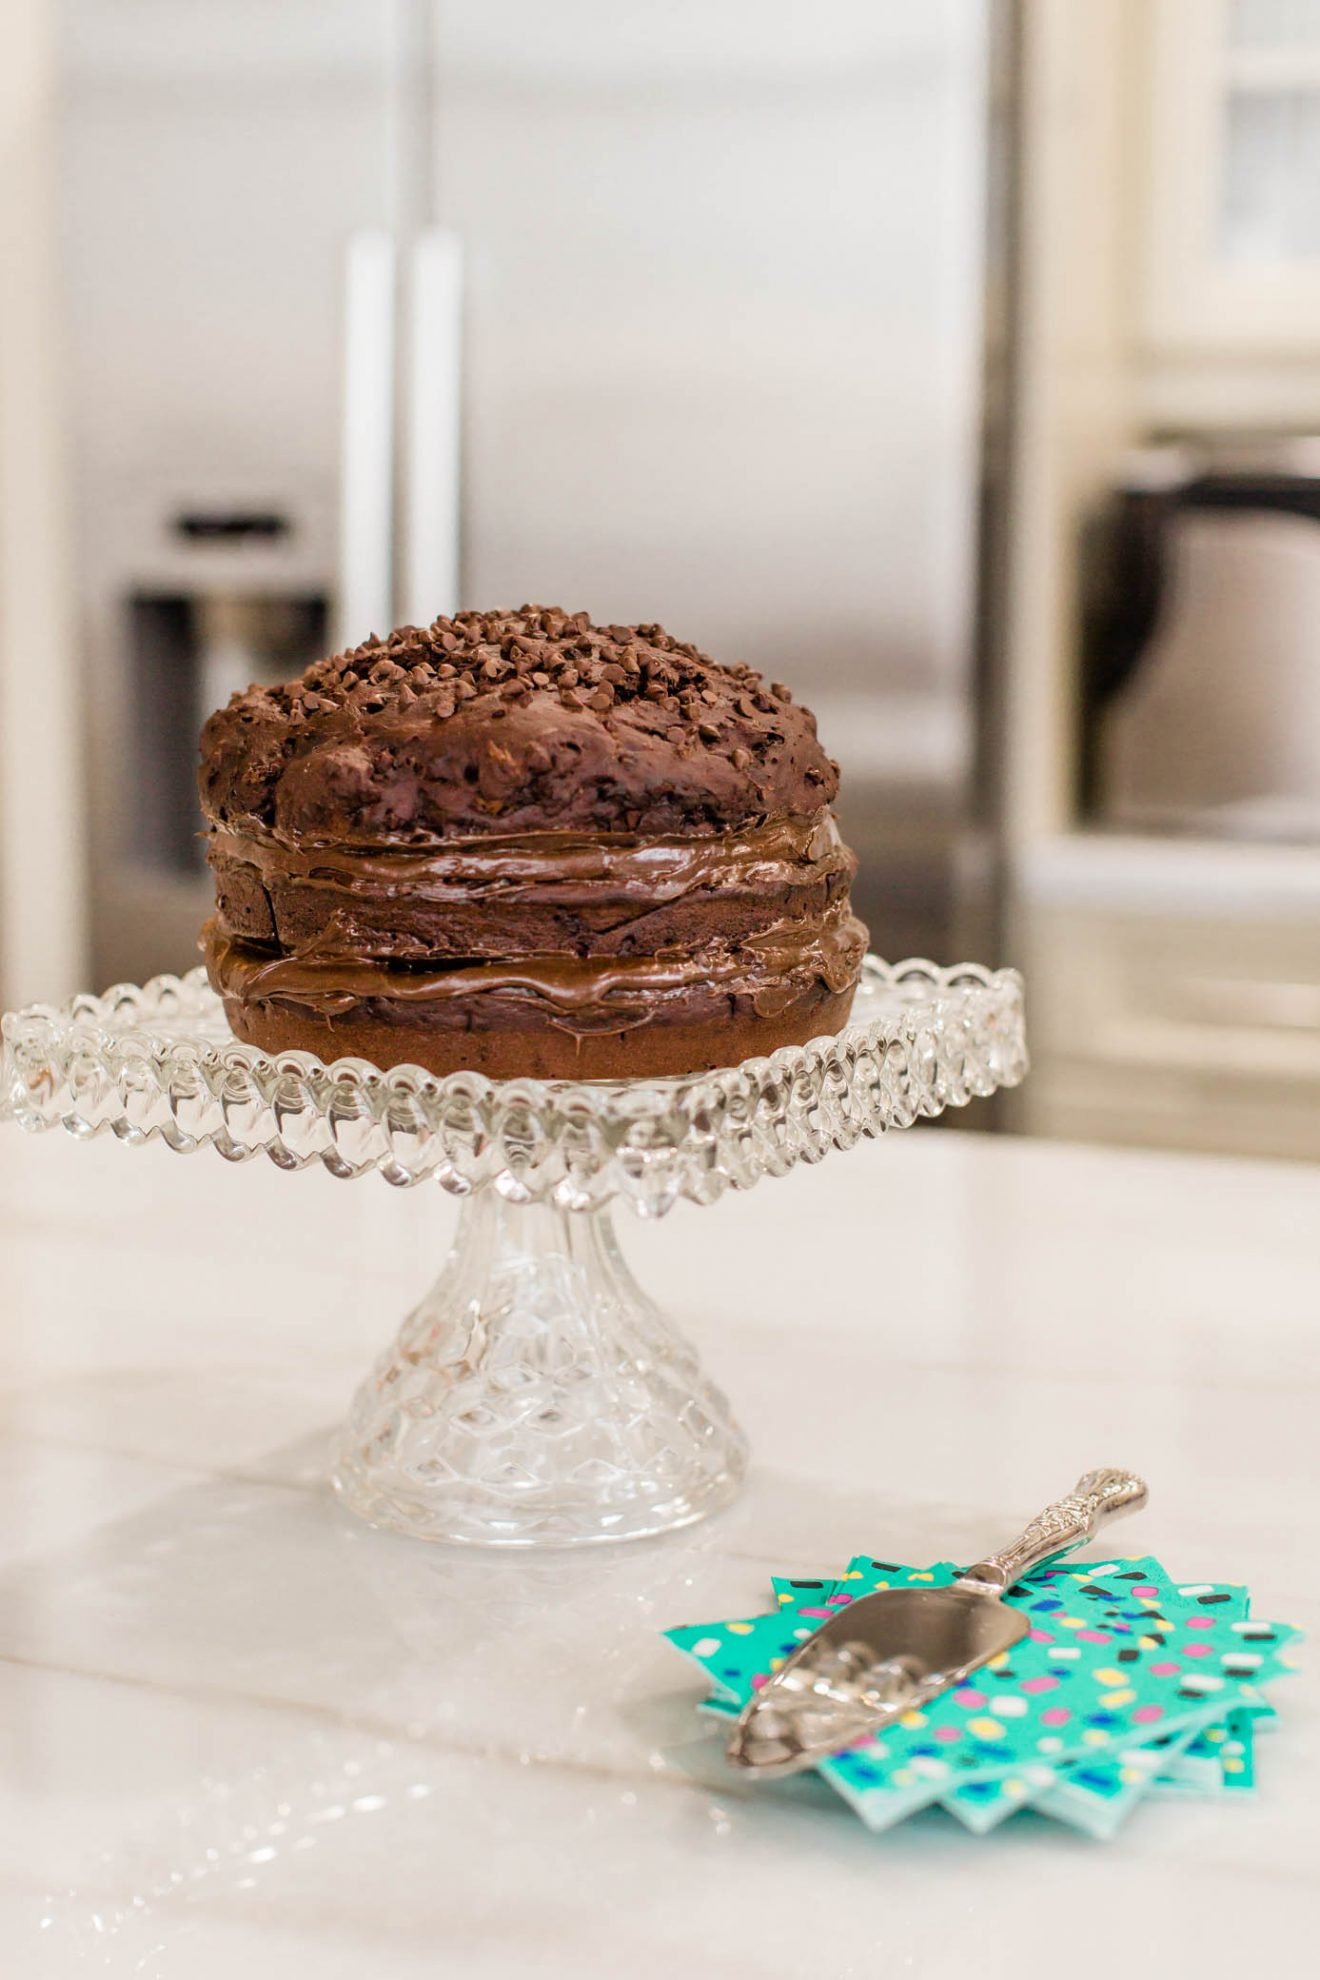 Chocolate cake on a cake stand in the kitchen with a serving knife and napkins.